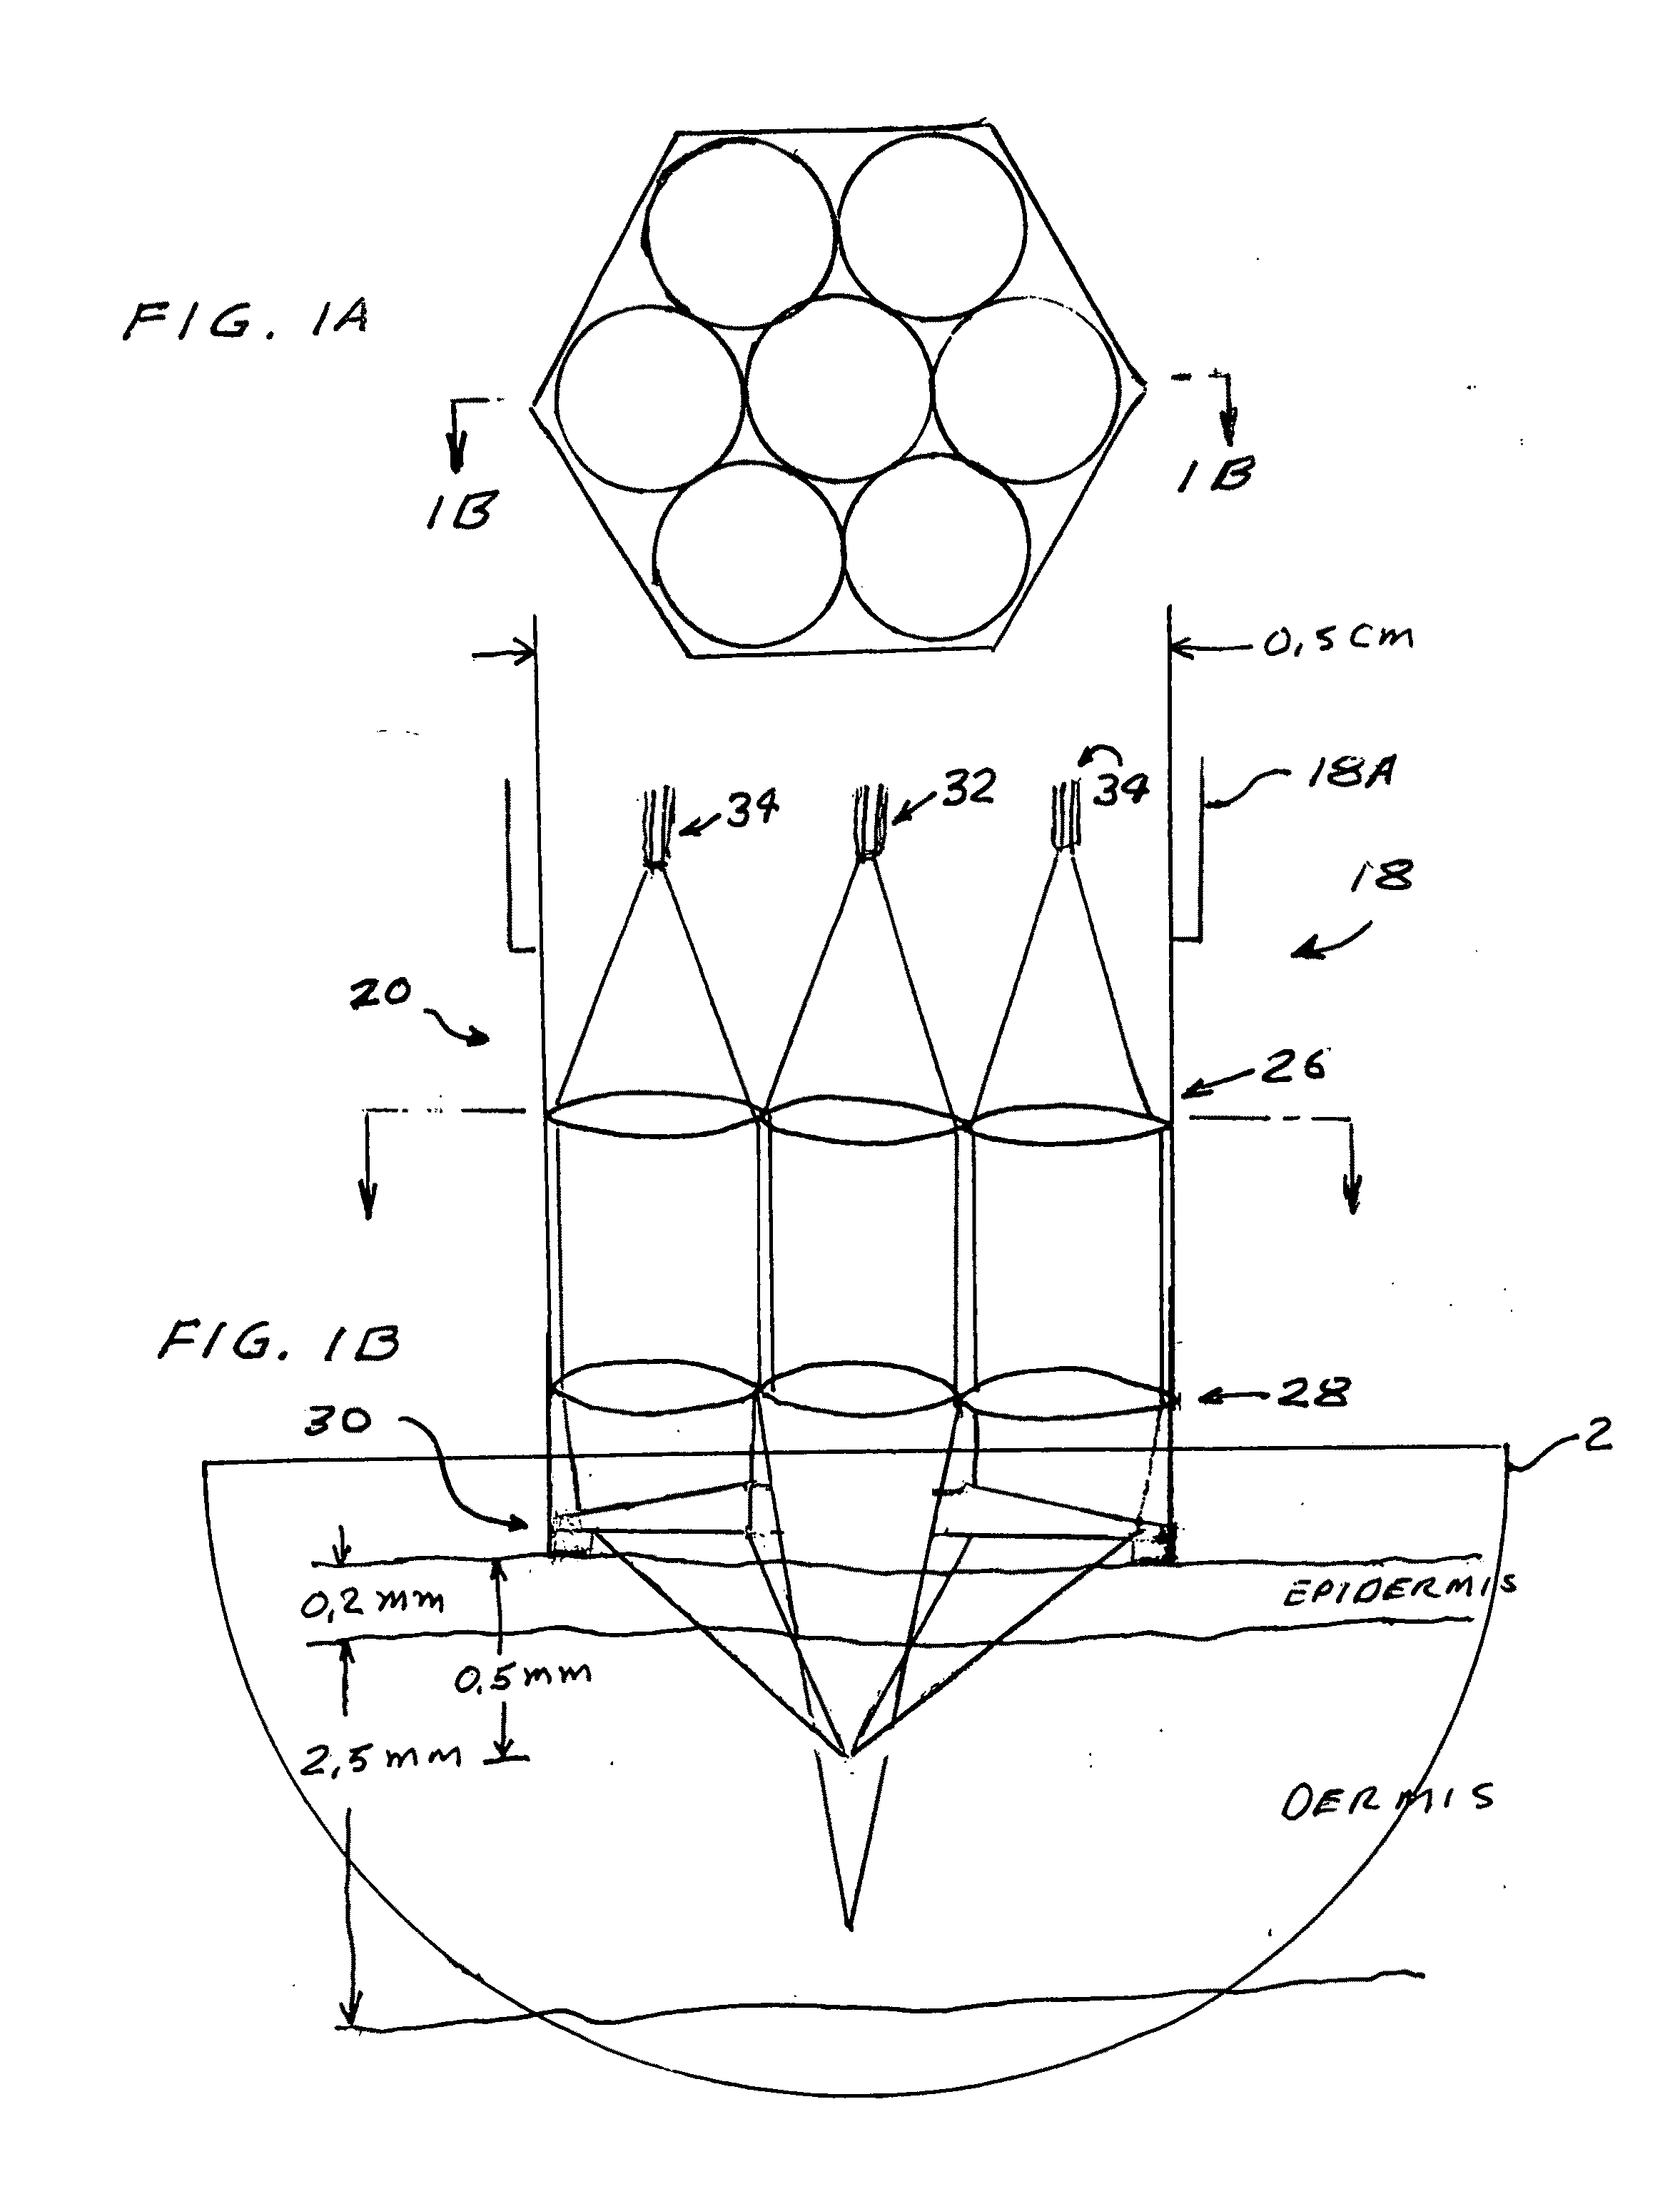 Laser treatment system and method for producing thermal cavities and energy droplets